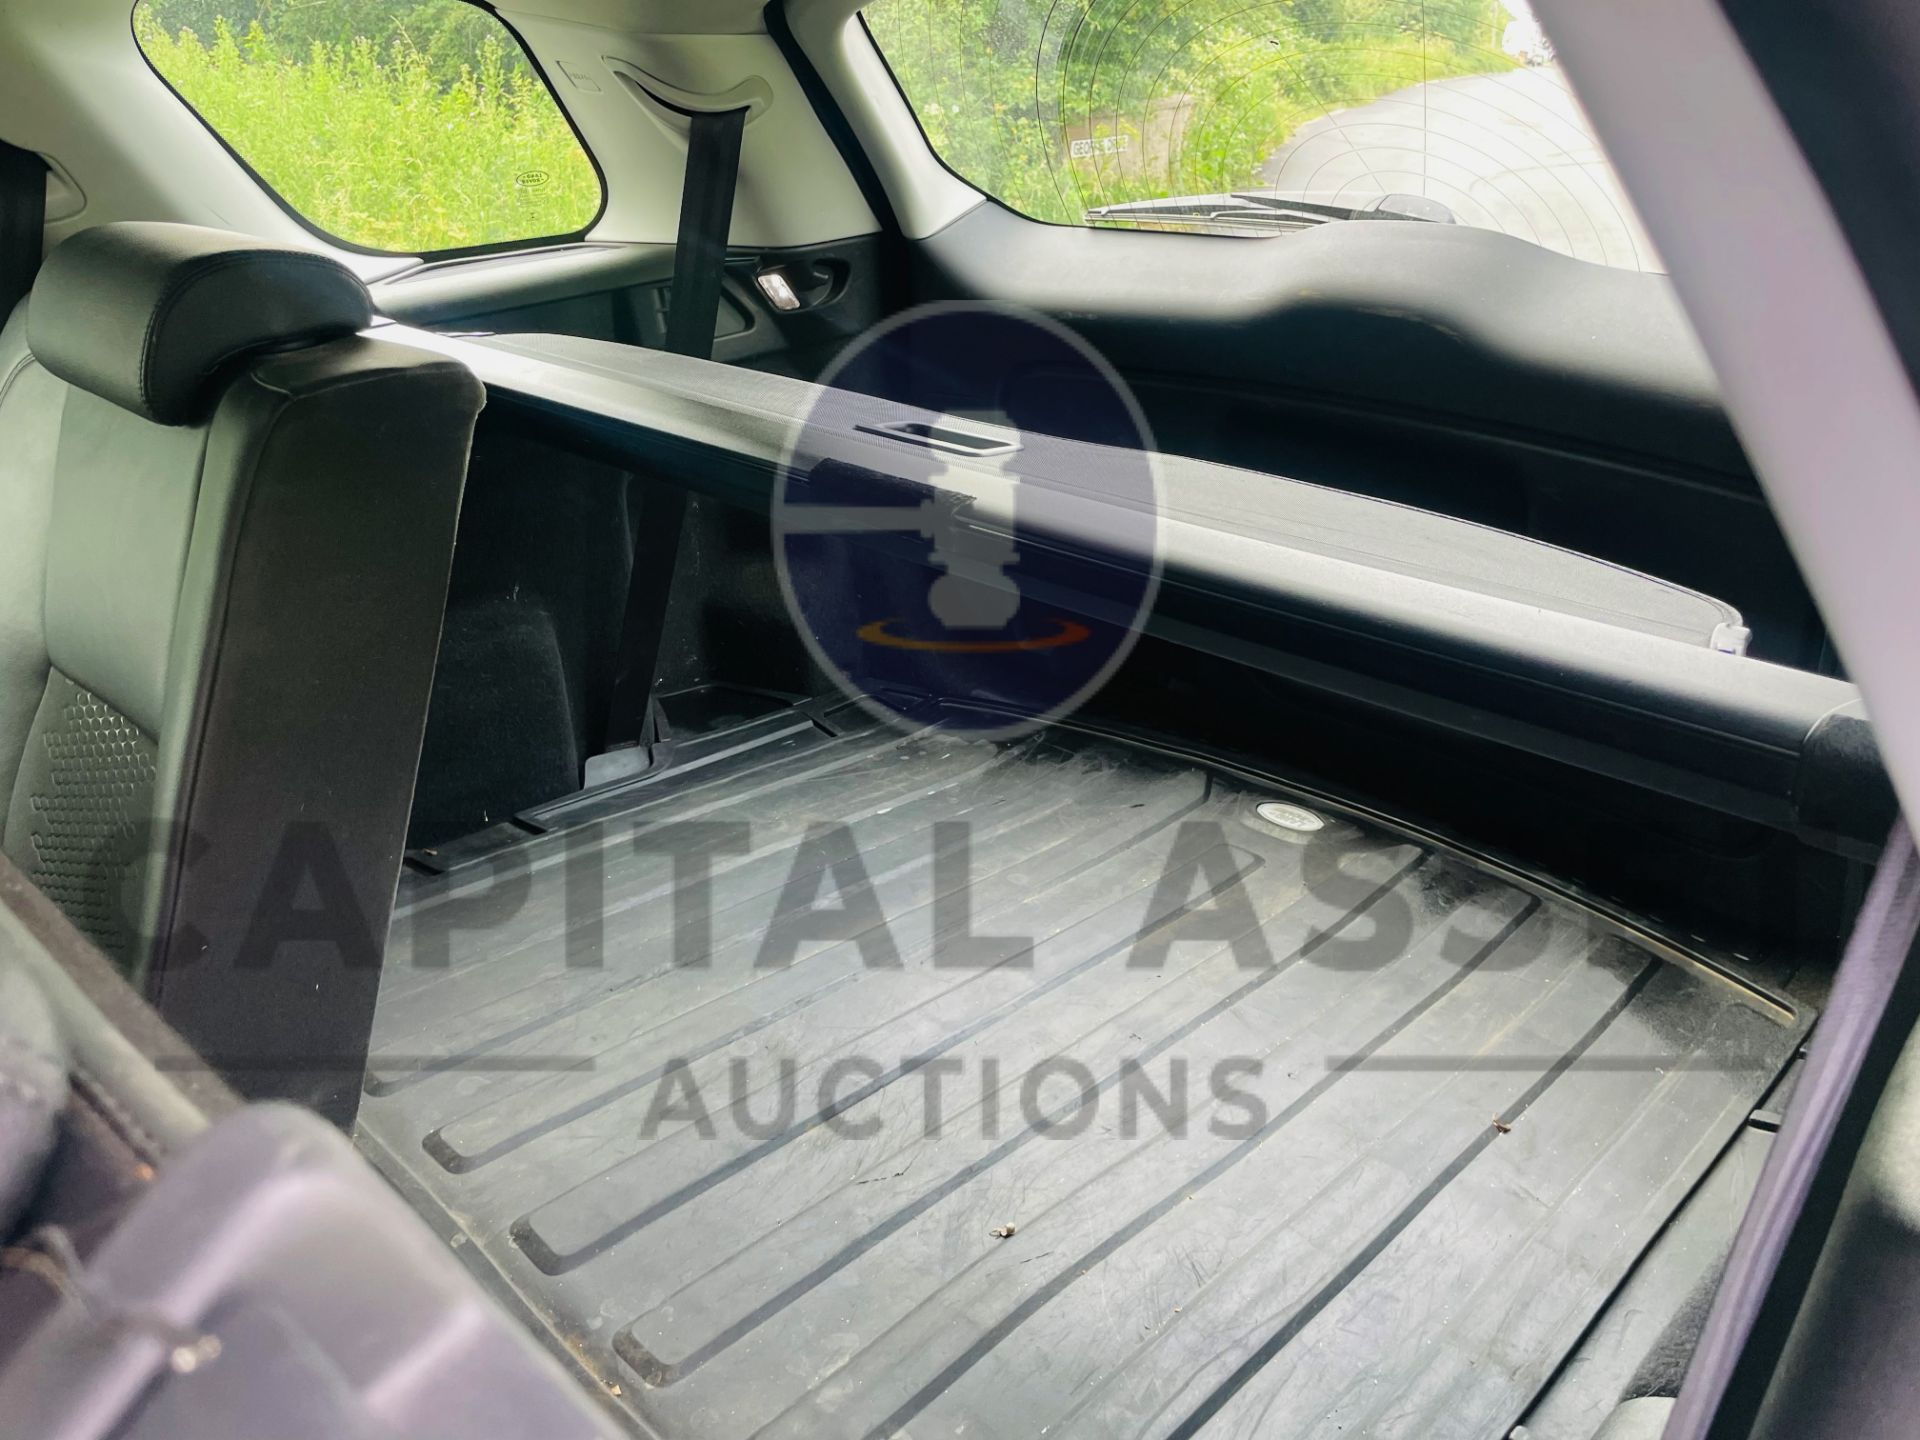 LAND ROVER DISCOVERY SPORT *SE TECH* 7 SEATER SUV (2016) 2.0 TD4 - AUTO *LEATHER & NAV* (NO VAT) - Image 29 of 54